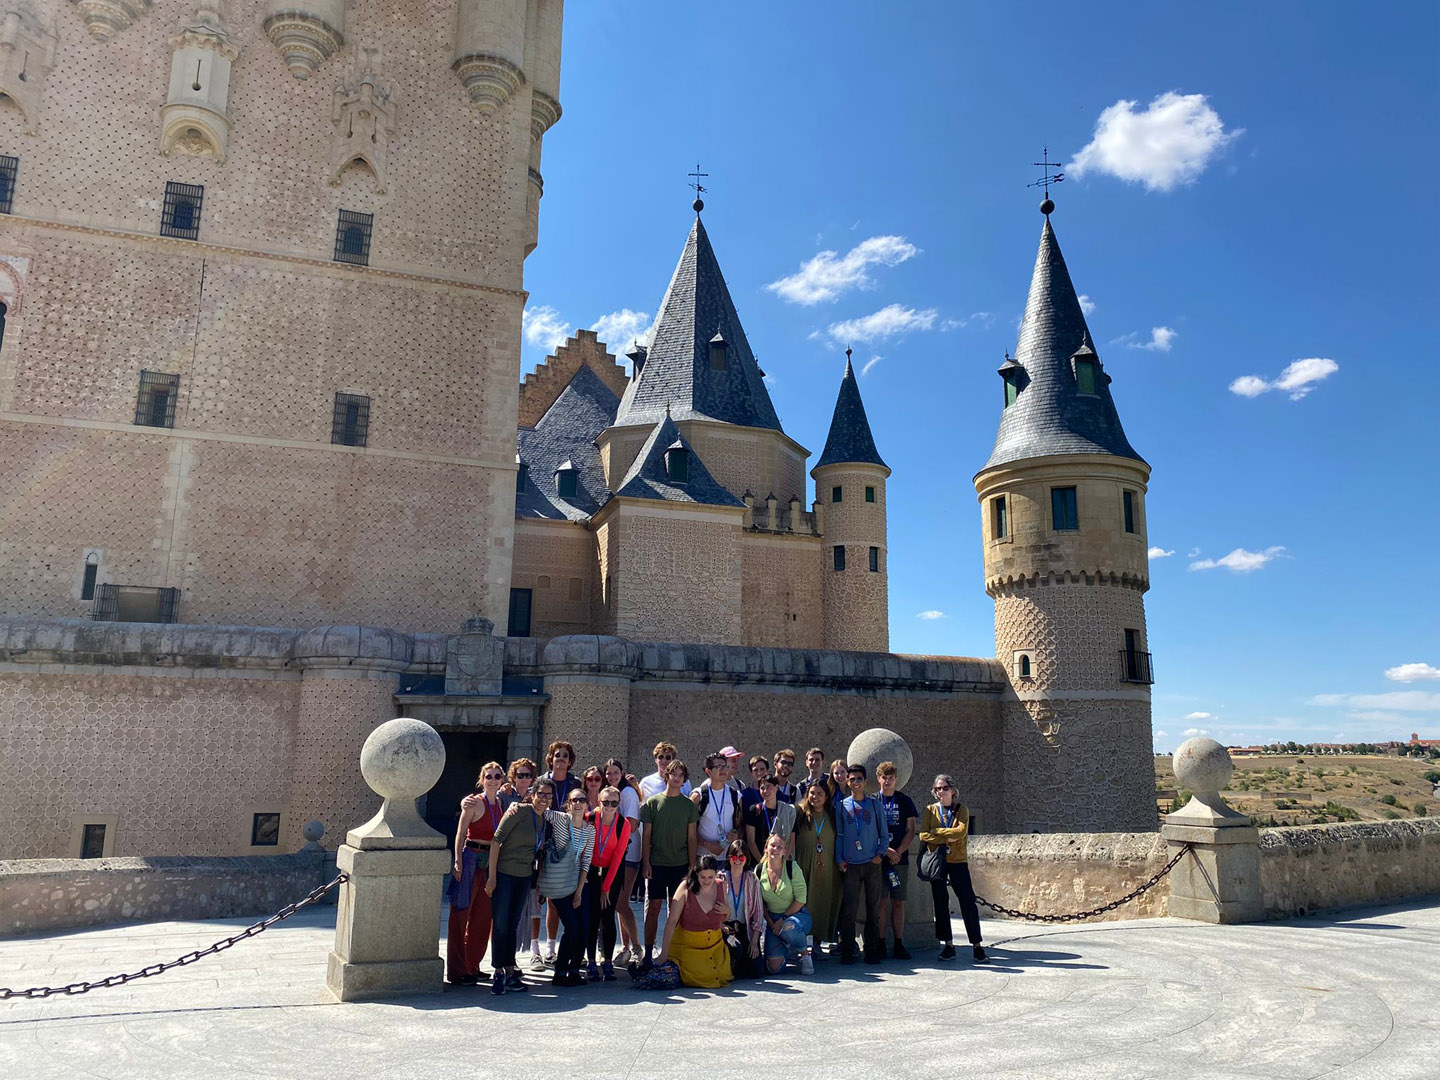 Students stand in front of the Alcázar de Segovia, one of the most famous castles in Spain. Photo by Carrie Ruiz